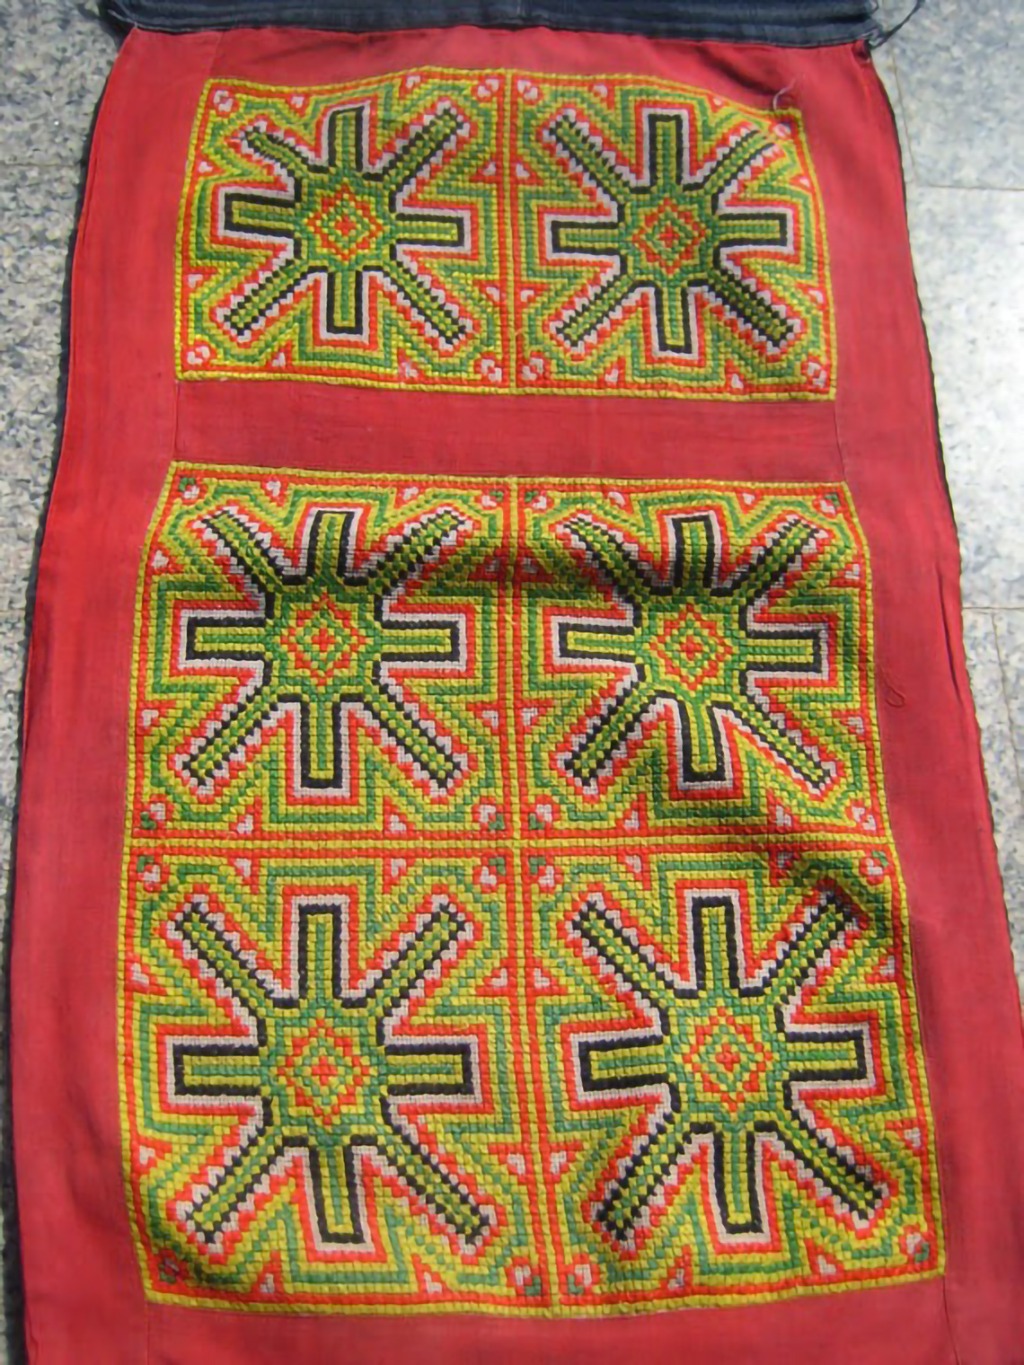 Vintage Hmong Fabric, handmade tapestry textiles, hill tribal fabric